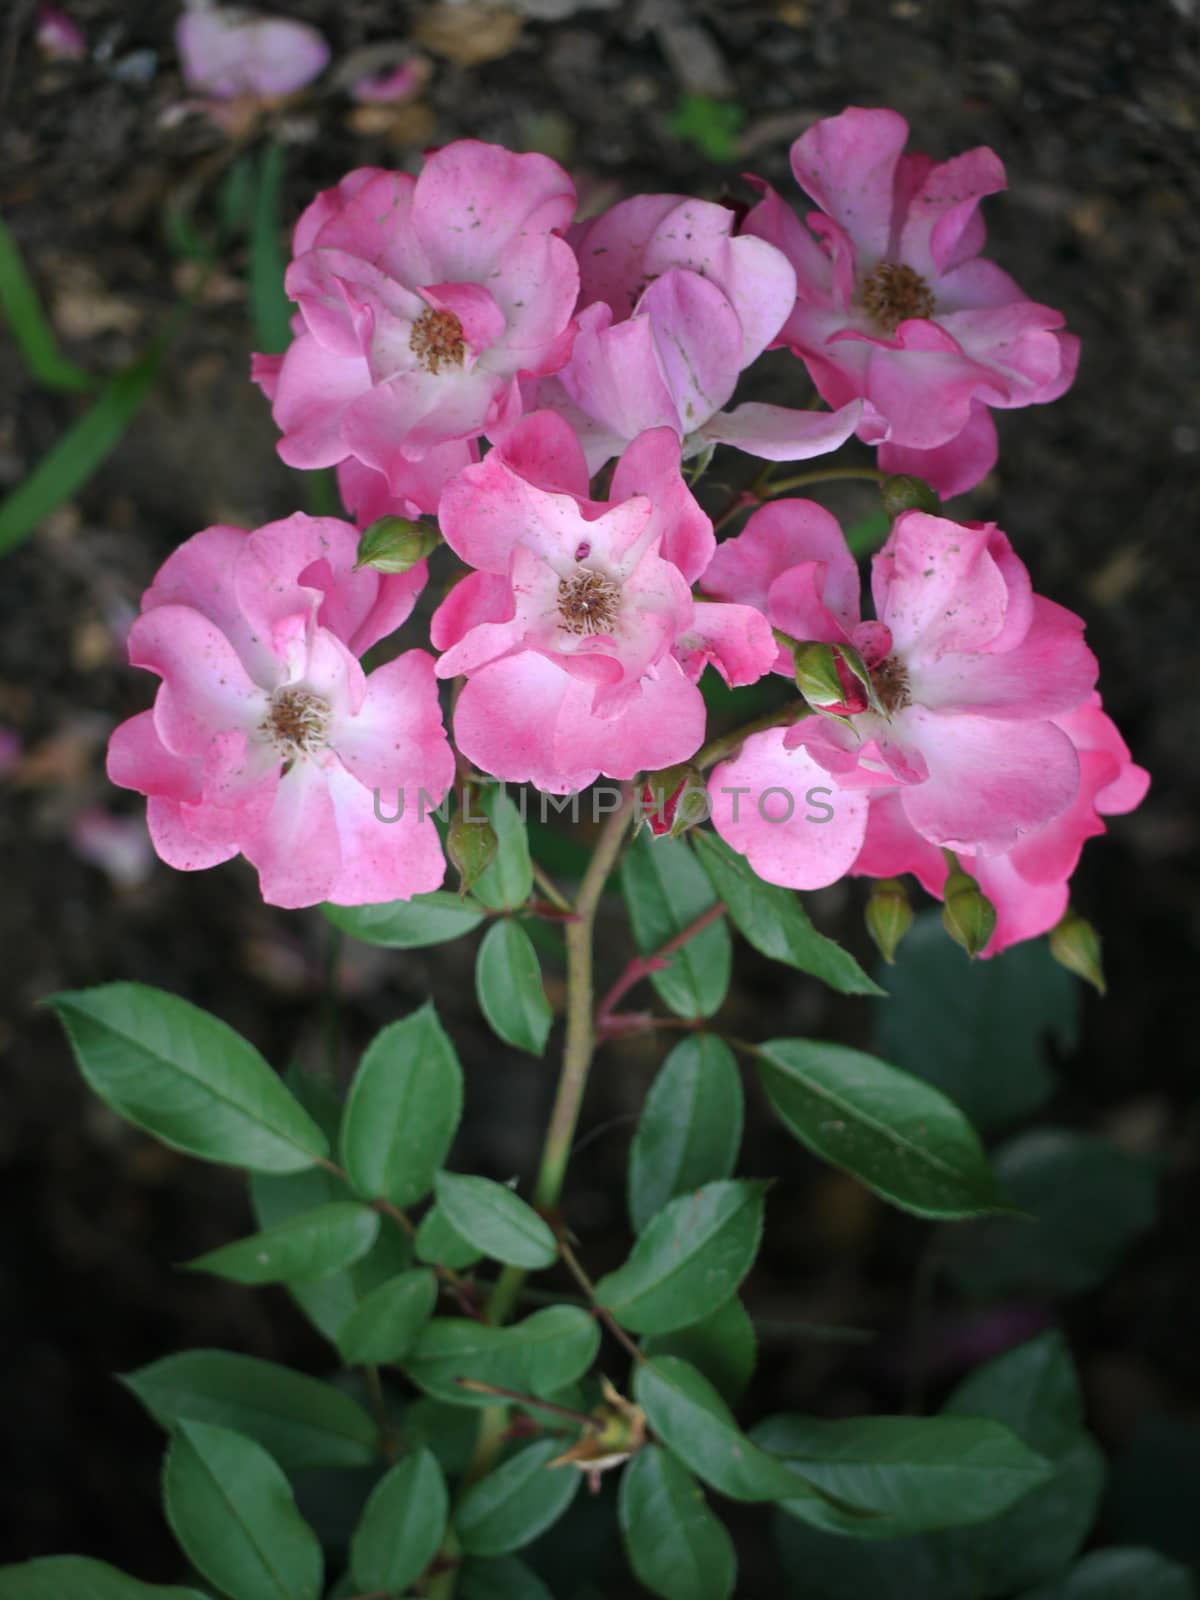 Seven flowers of pink color with white centers on one stem by Adamchuk